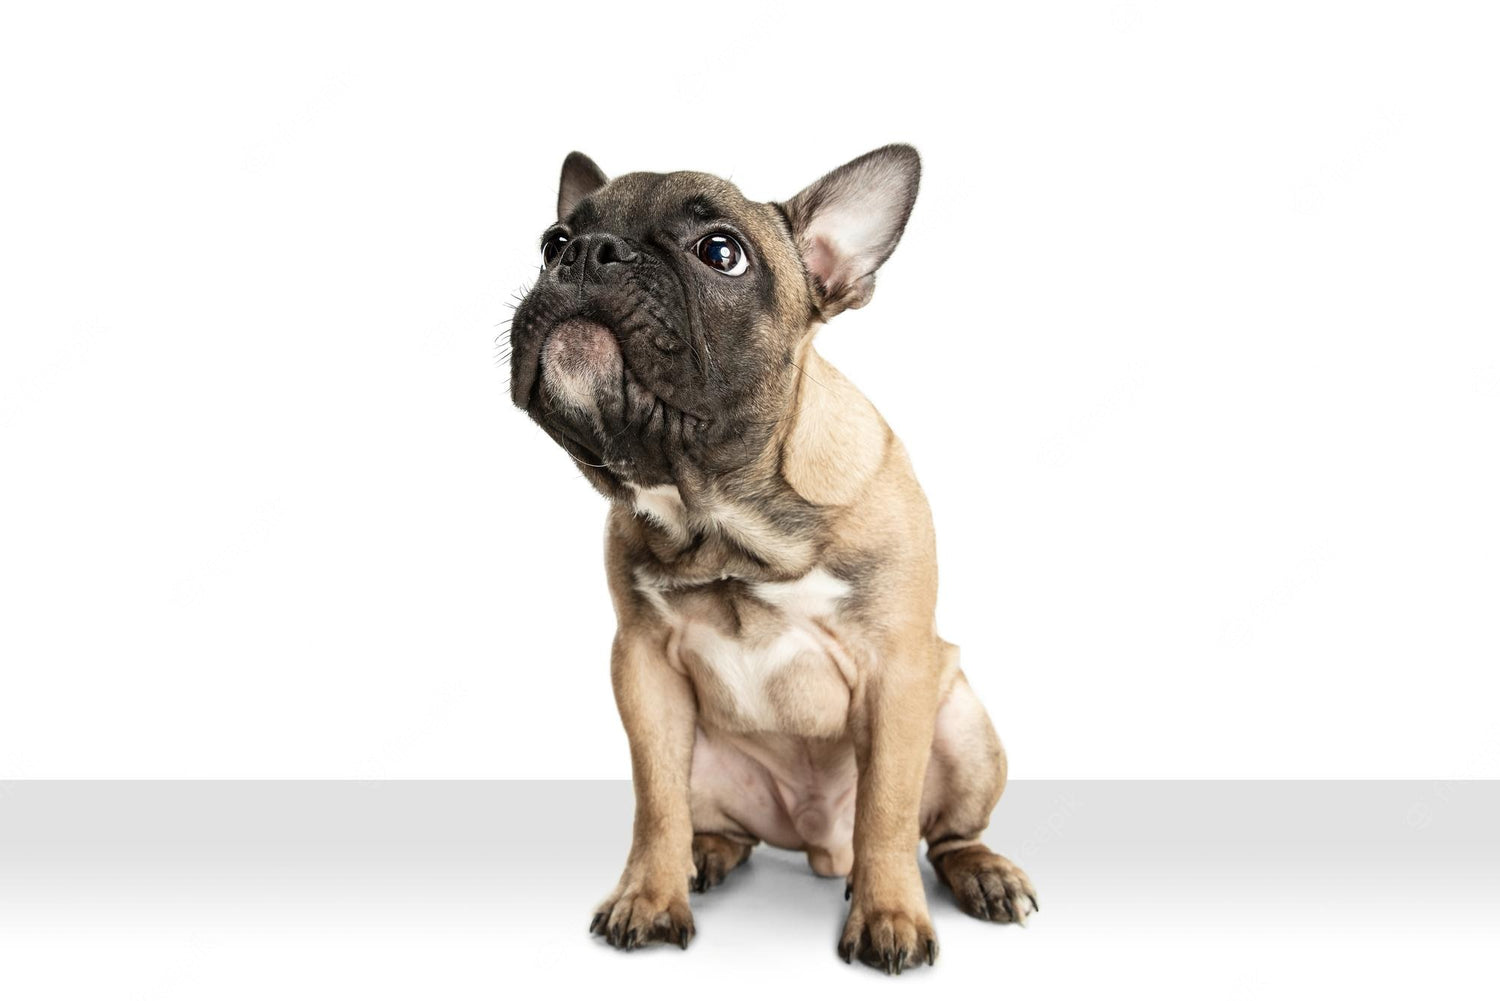 Why Frenchies Make Great Pets